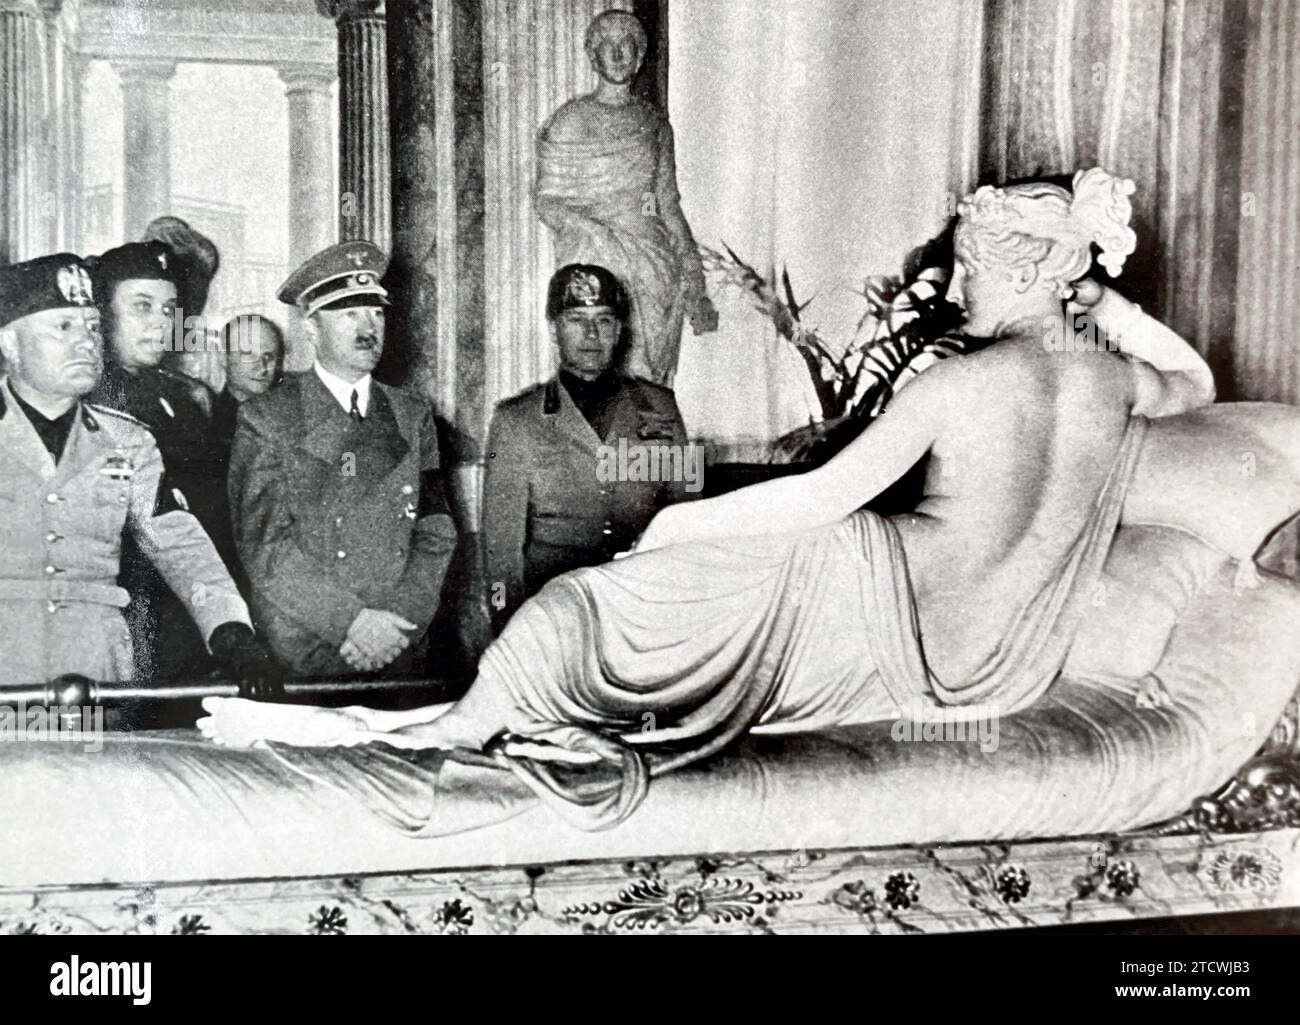 ADOLF HITLER  at n right with Benito Mussolini at the Borghese Gallery in Rome in 1938 viewing the statue of Paolina Bonaparte Stock Photo